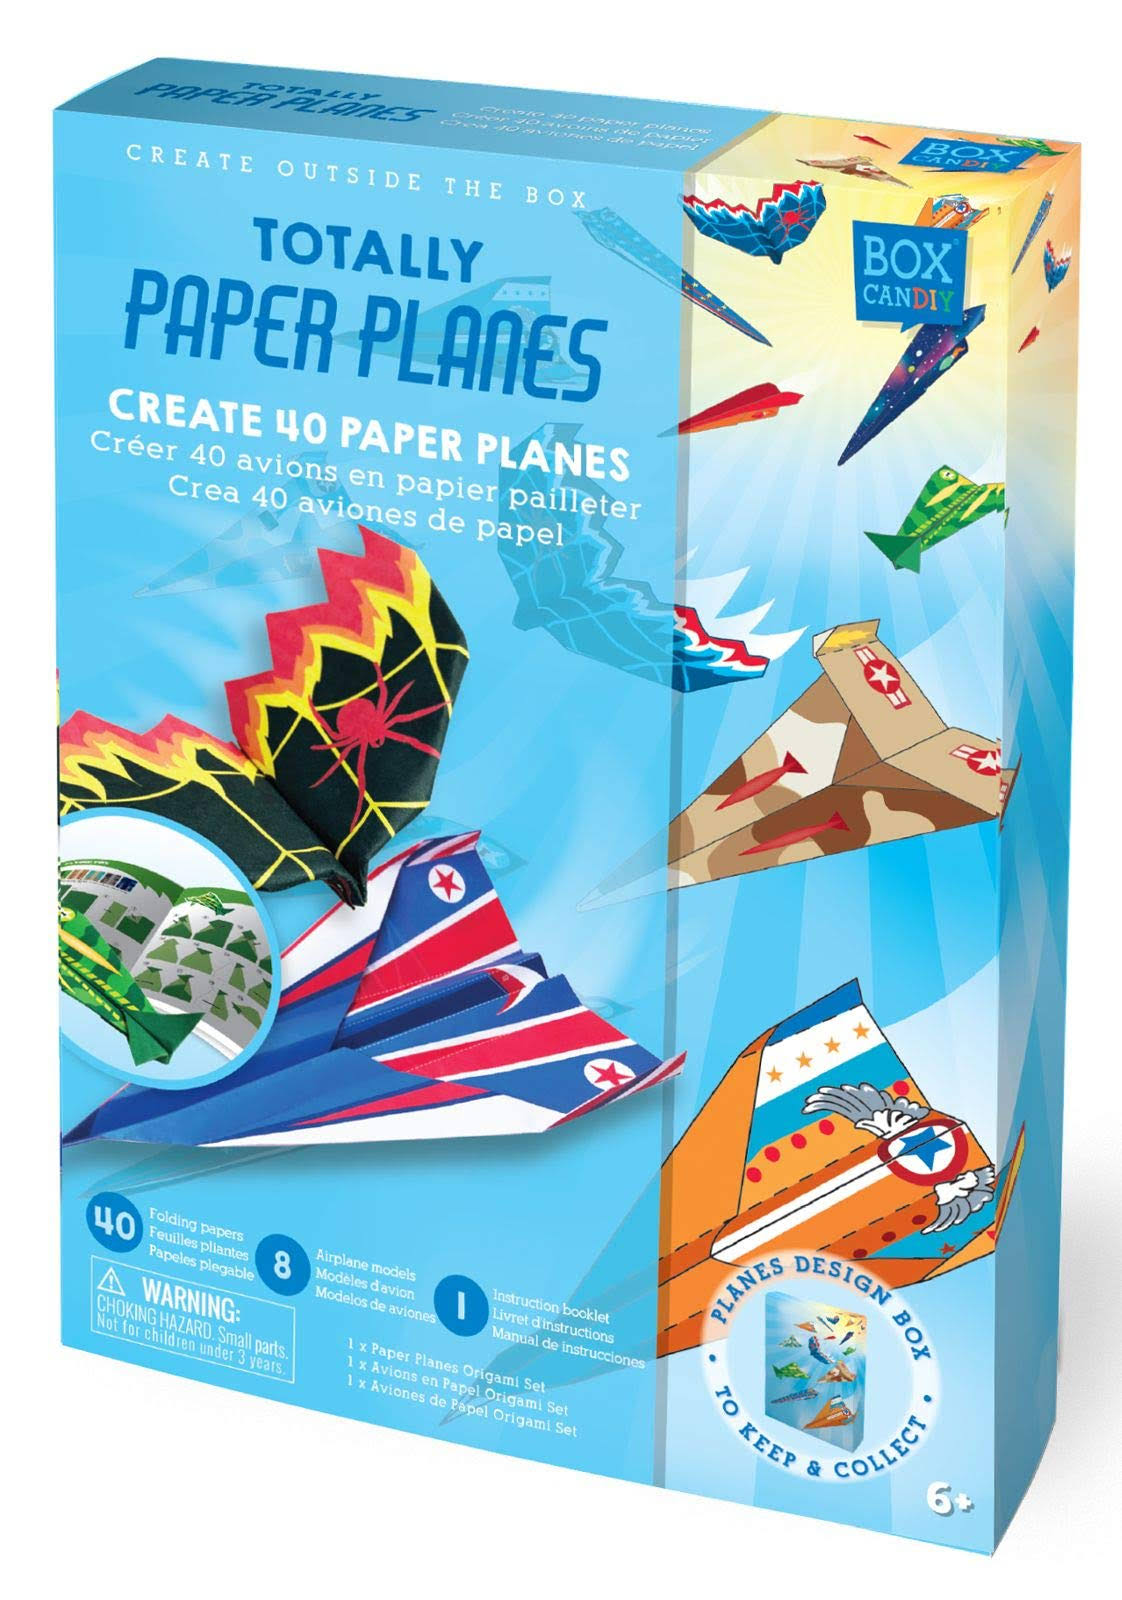 Box CANDIY Totally Paper Planes Origami Set One-Size